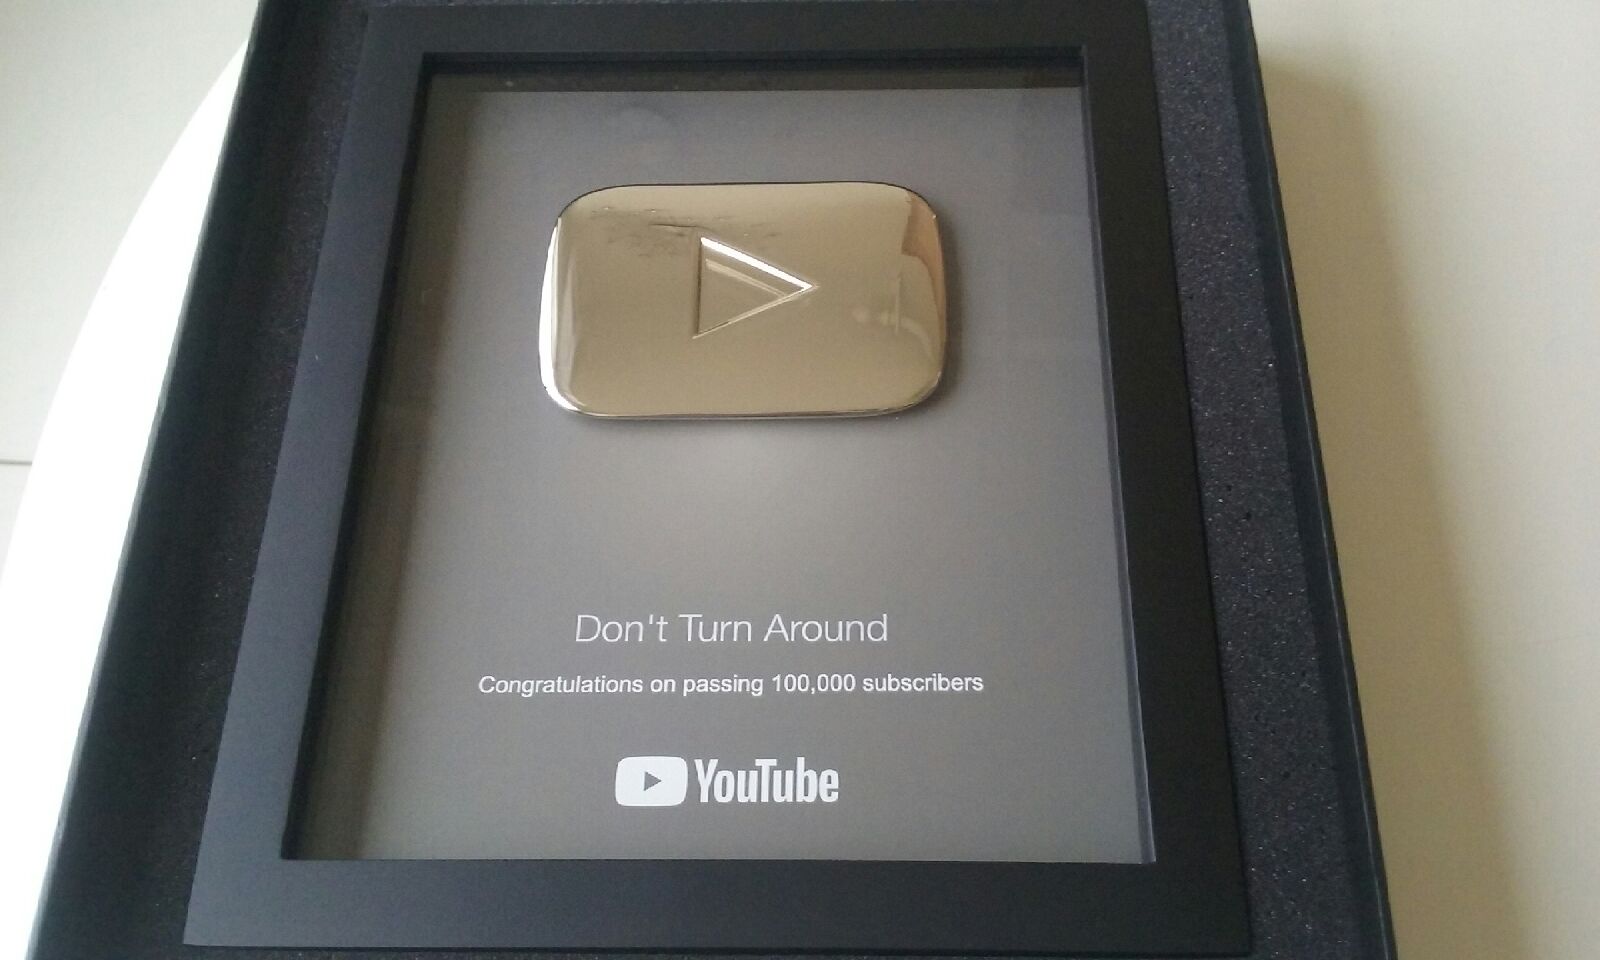 Don T Turn Around 100k Youtube Silver Play Button Just Arrived Youtube 100k Silverplaybutton 100ksubscribers Horror Dontturnaround Texts Creepytexts Creepypasta Youtubeplaque Thanks To Everyone Who S Watching T Co